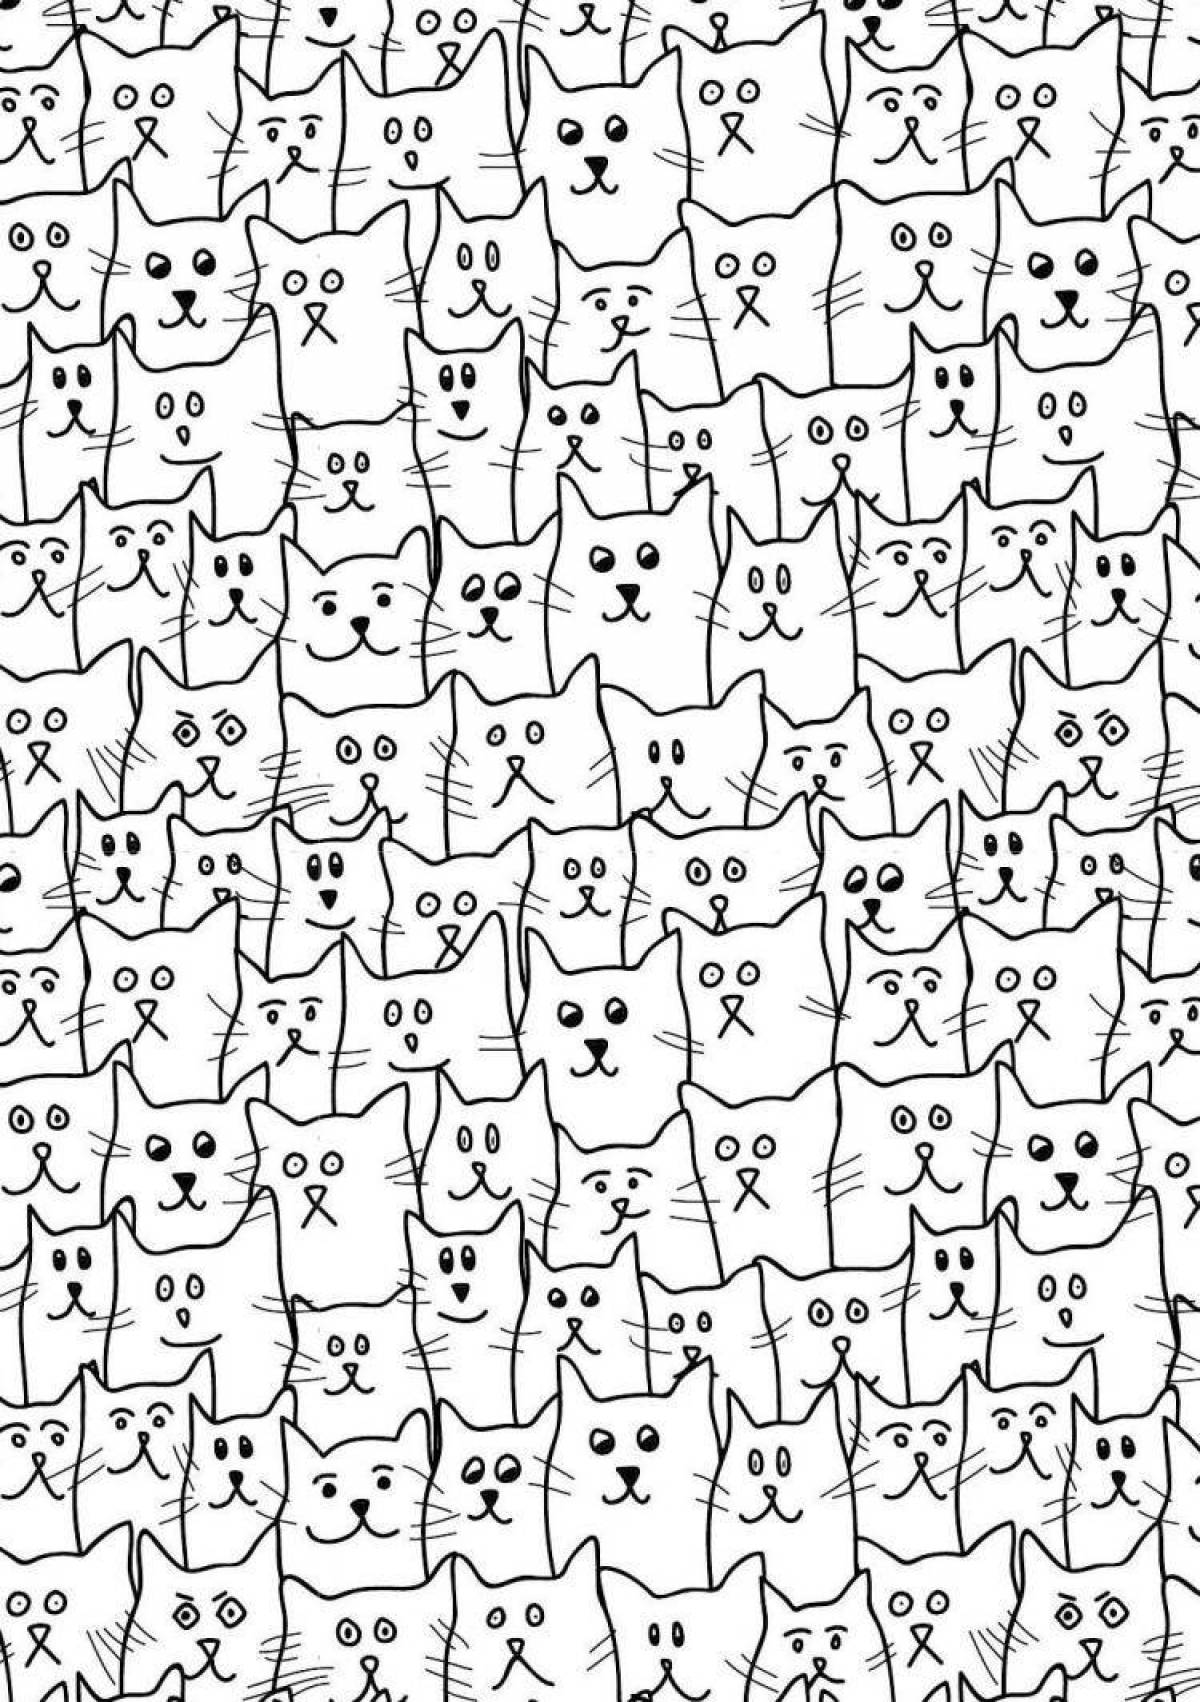 Adorable coloring book with lots of cats